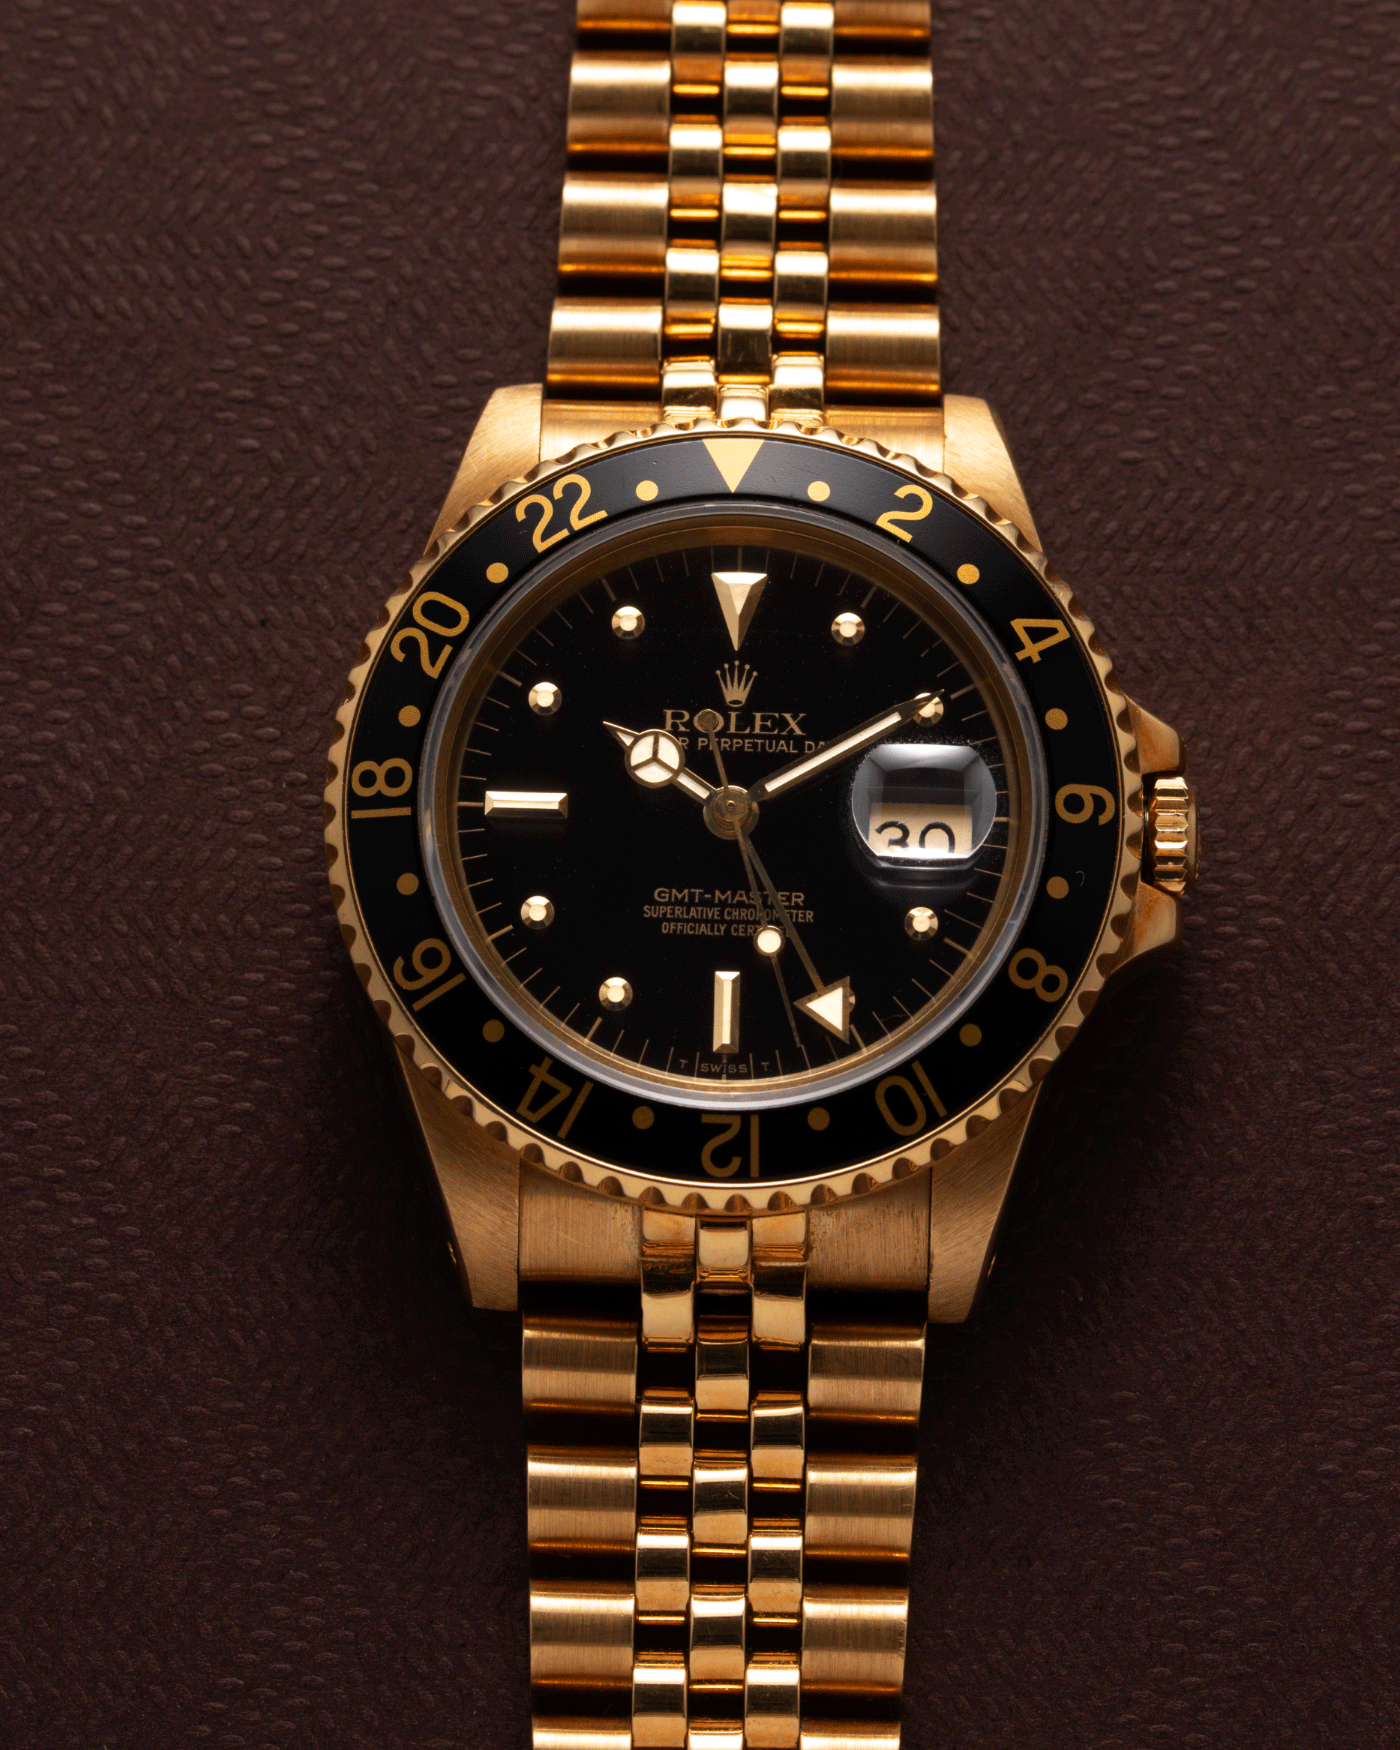 Brand: Rolex Year: 1985 Model: GMT-Master Reference Number: 1675 Serial Number: 8.7 mil Material: 18k Yellow Gold Movement: Cal. 1570 Case Diameter: 40mm Lug Width: 20mm Strap: 18k Yellow Gold Rolex 8386 Jubilee Bracelet with ’47’ End Links